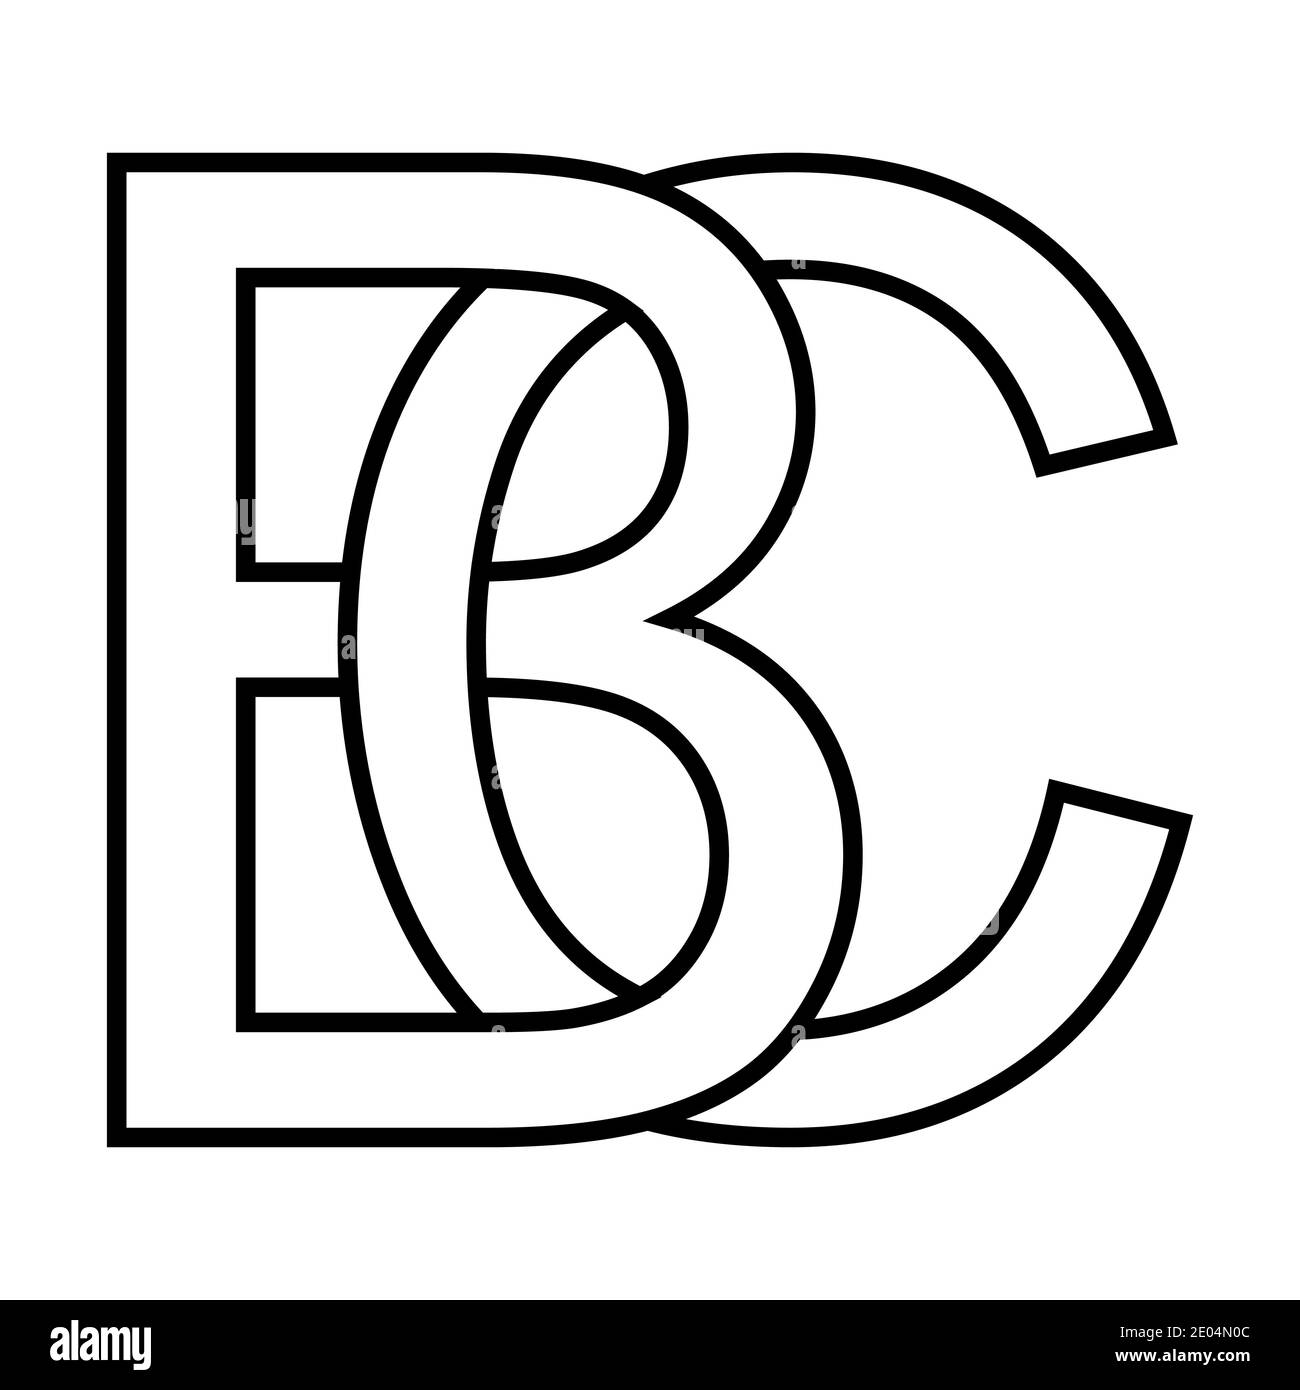 Logo sign bc, cb icon sign two interlaced letters B and C vector logo bc, cb first capital letters pattern alphabet b, c Stock Vector